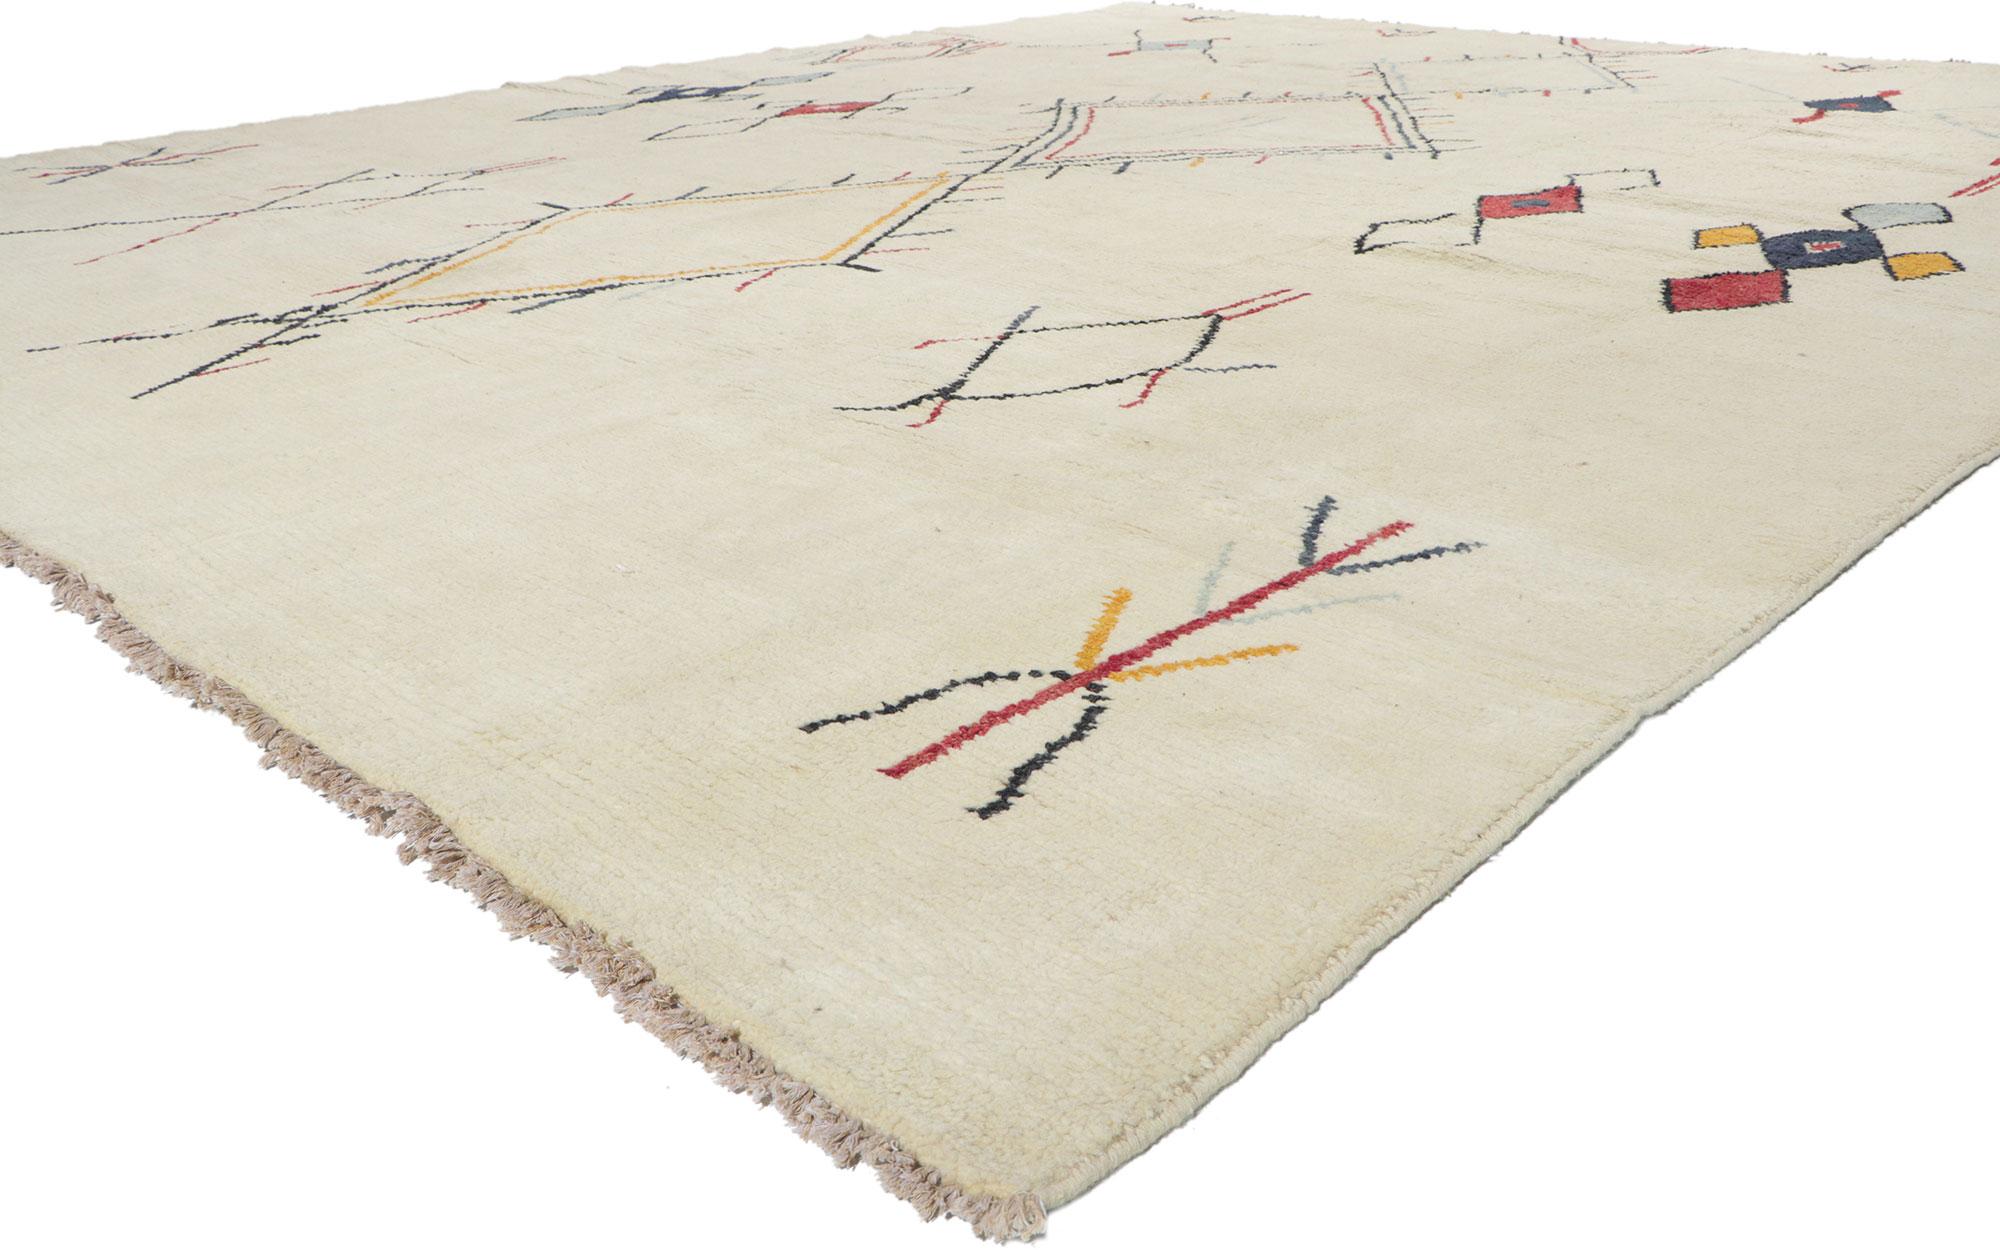 80710 New Contemporary Moroccan Room Size rug 12'00 x 14'06. Displaying an expressive design with incredible detail and texture, this hand knotted wool contemporary Moroccan area rug is a captivating vision of woven beauty. The eye-catching tribal